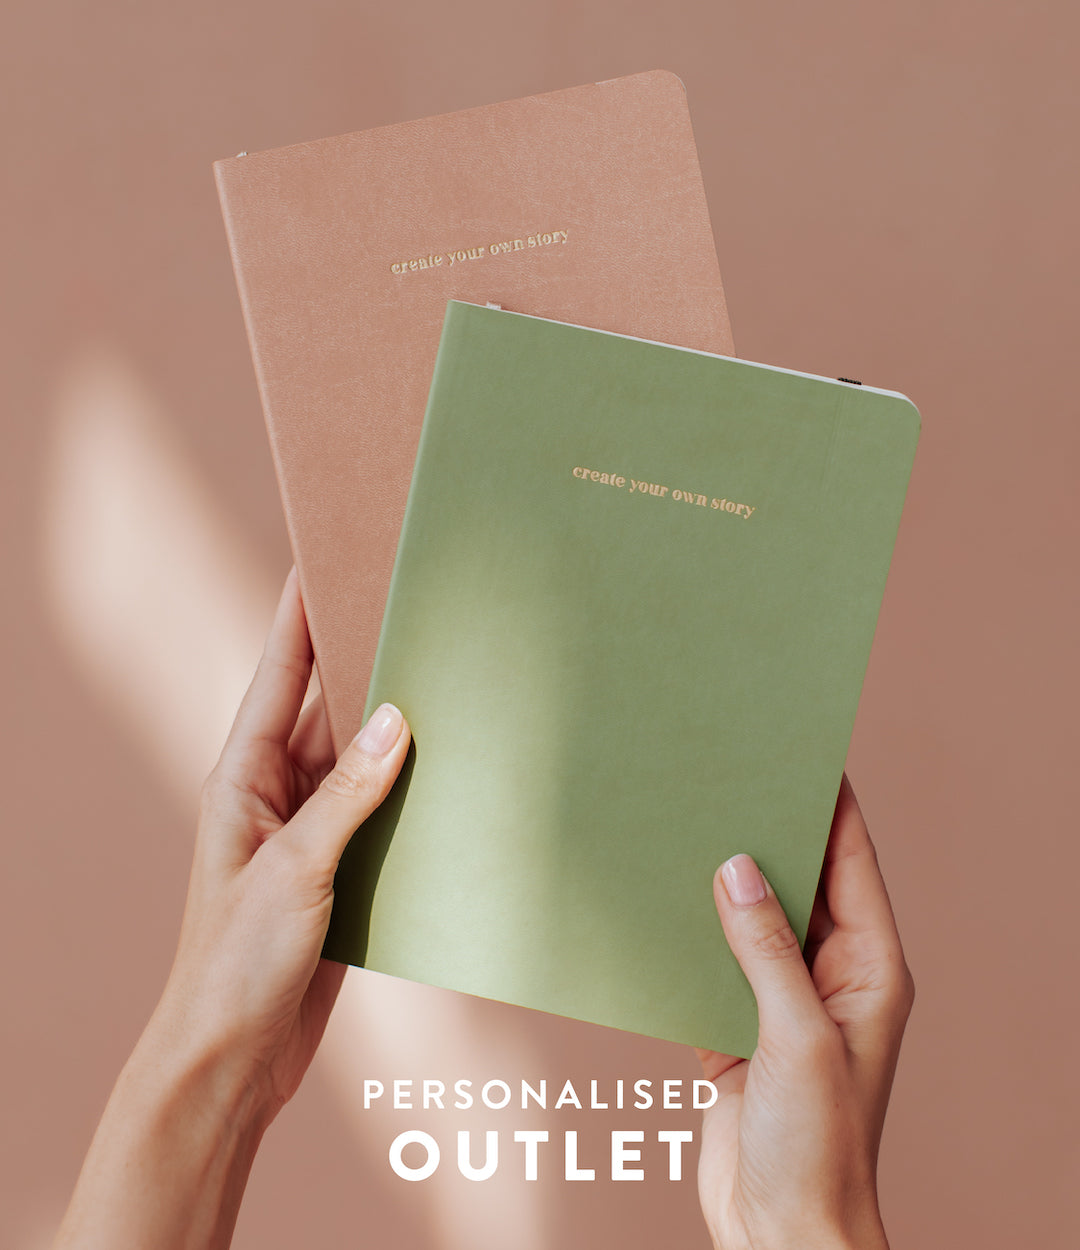 (Personalised Outlet) Undated Lifestyle Planner